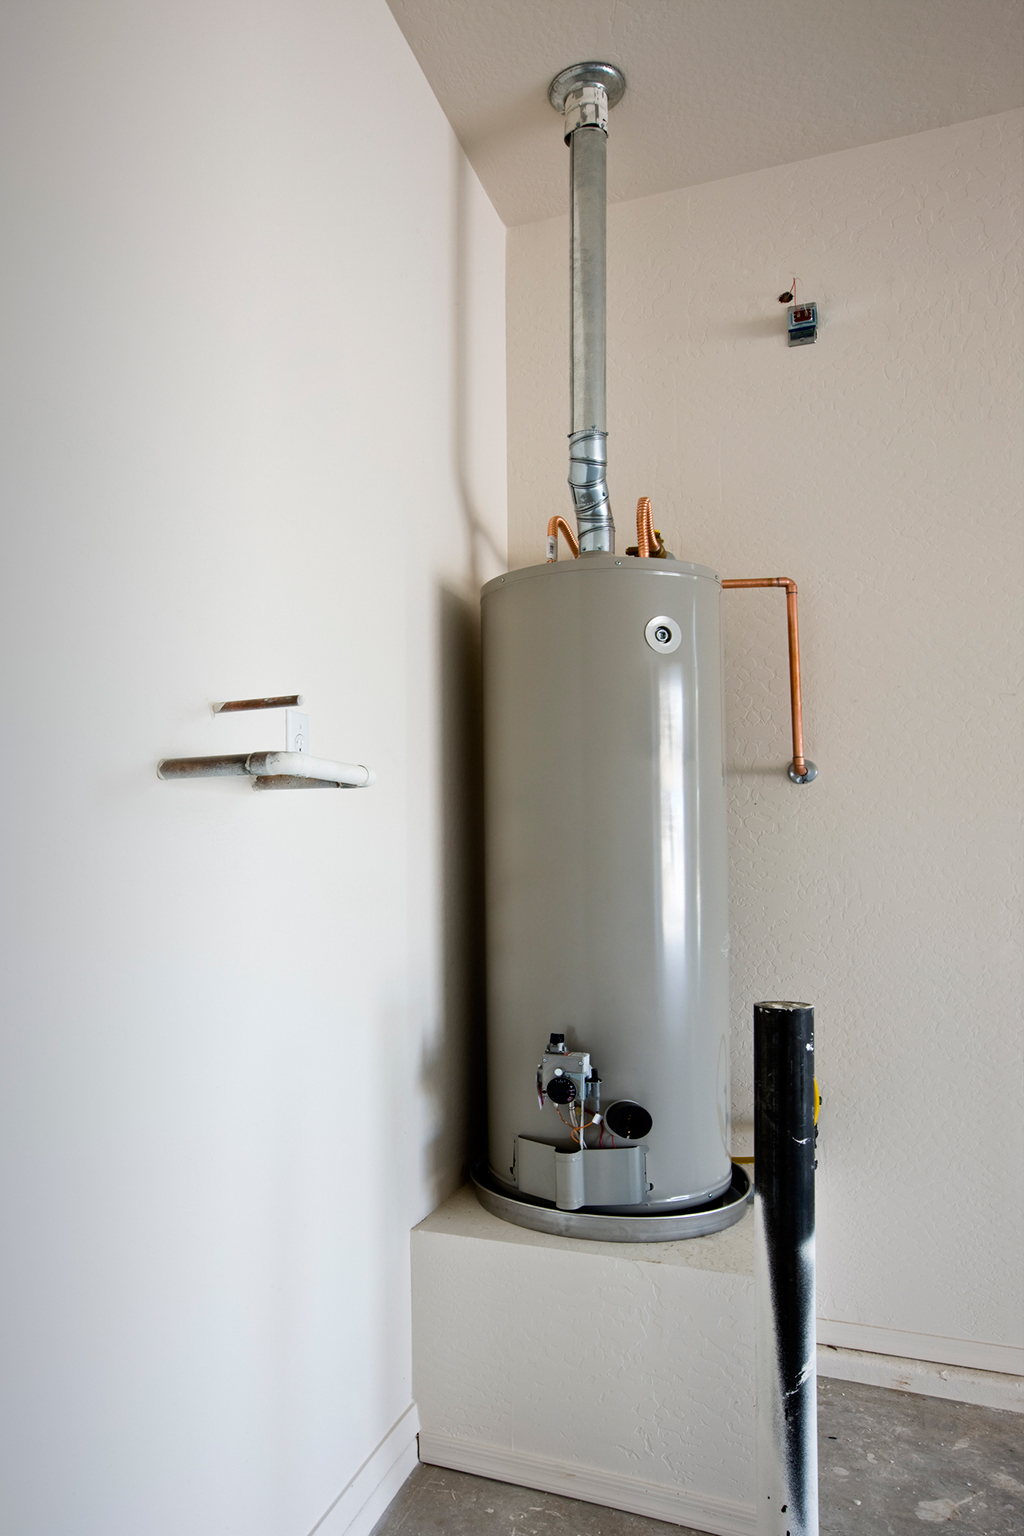 Where To Go For A Water Heater Repair In The Big Easy | New Orleans, LA